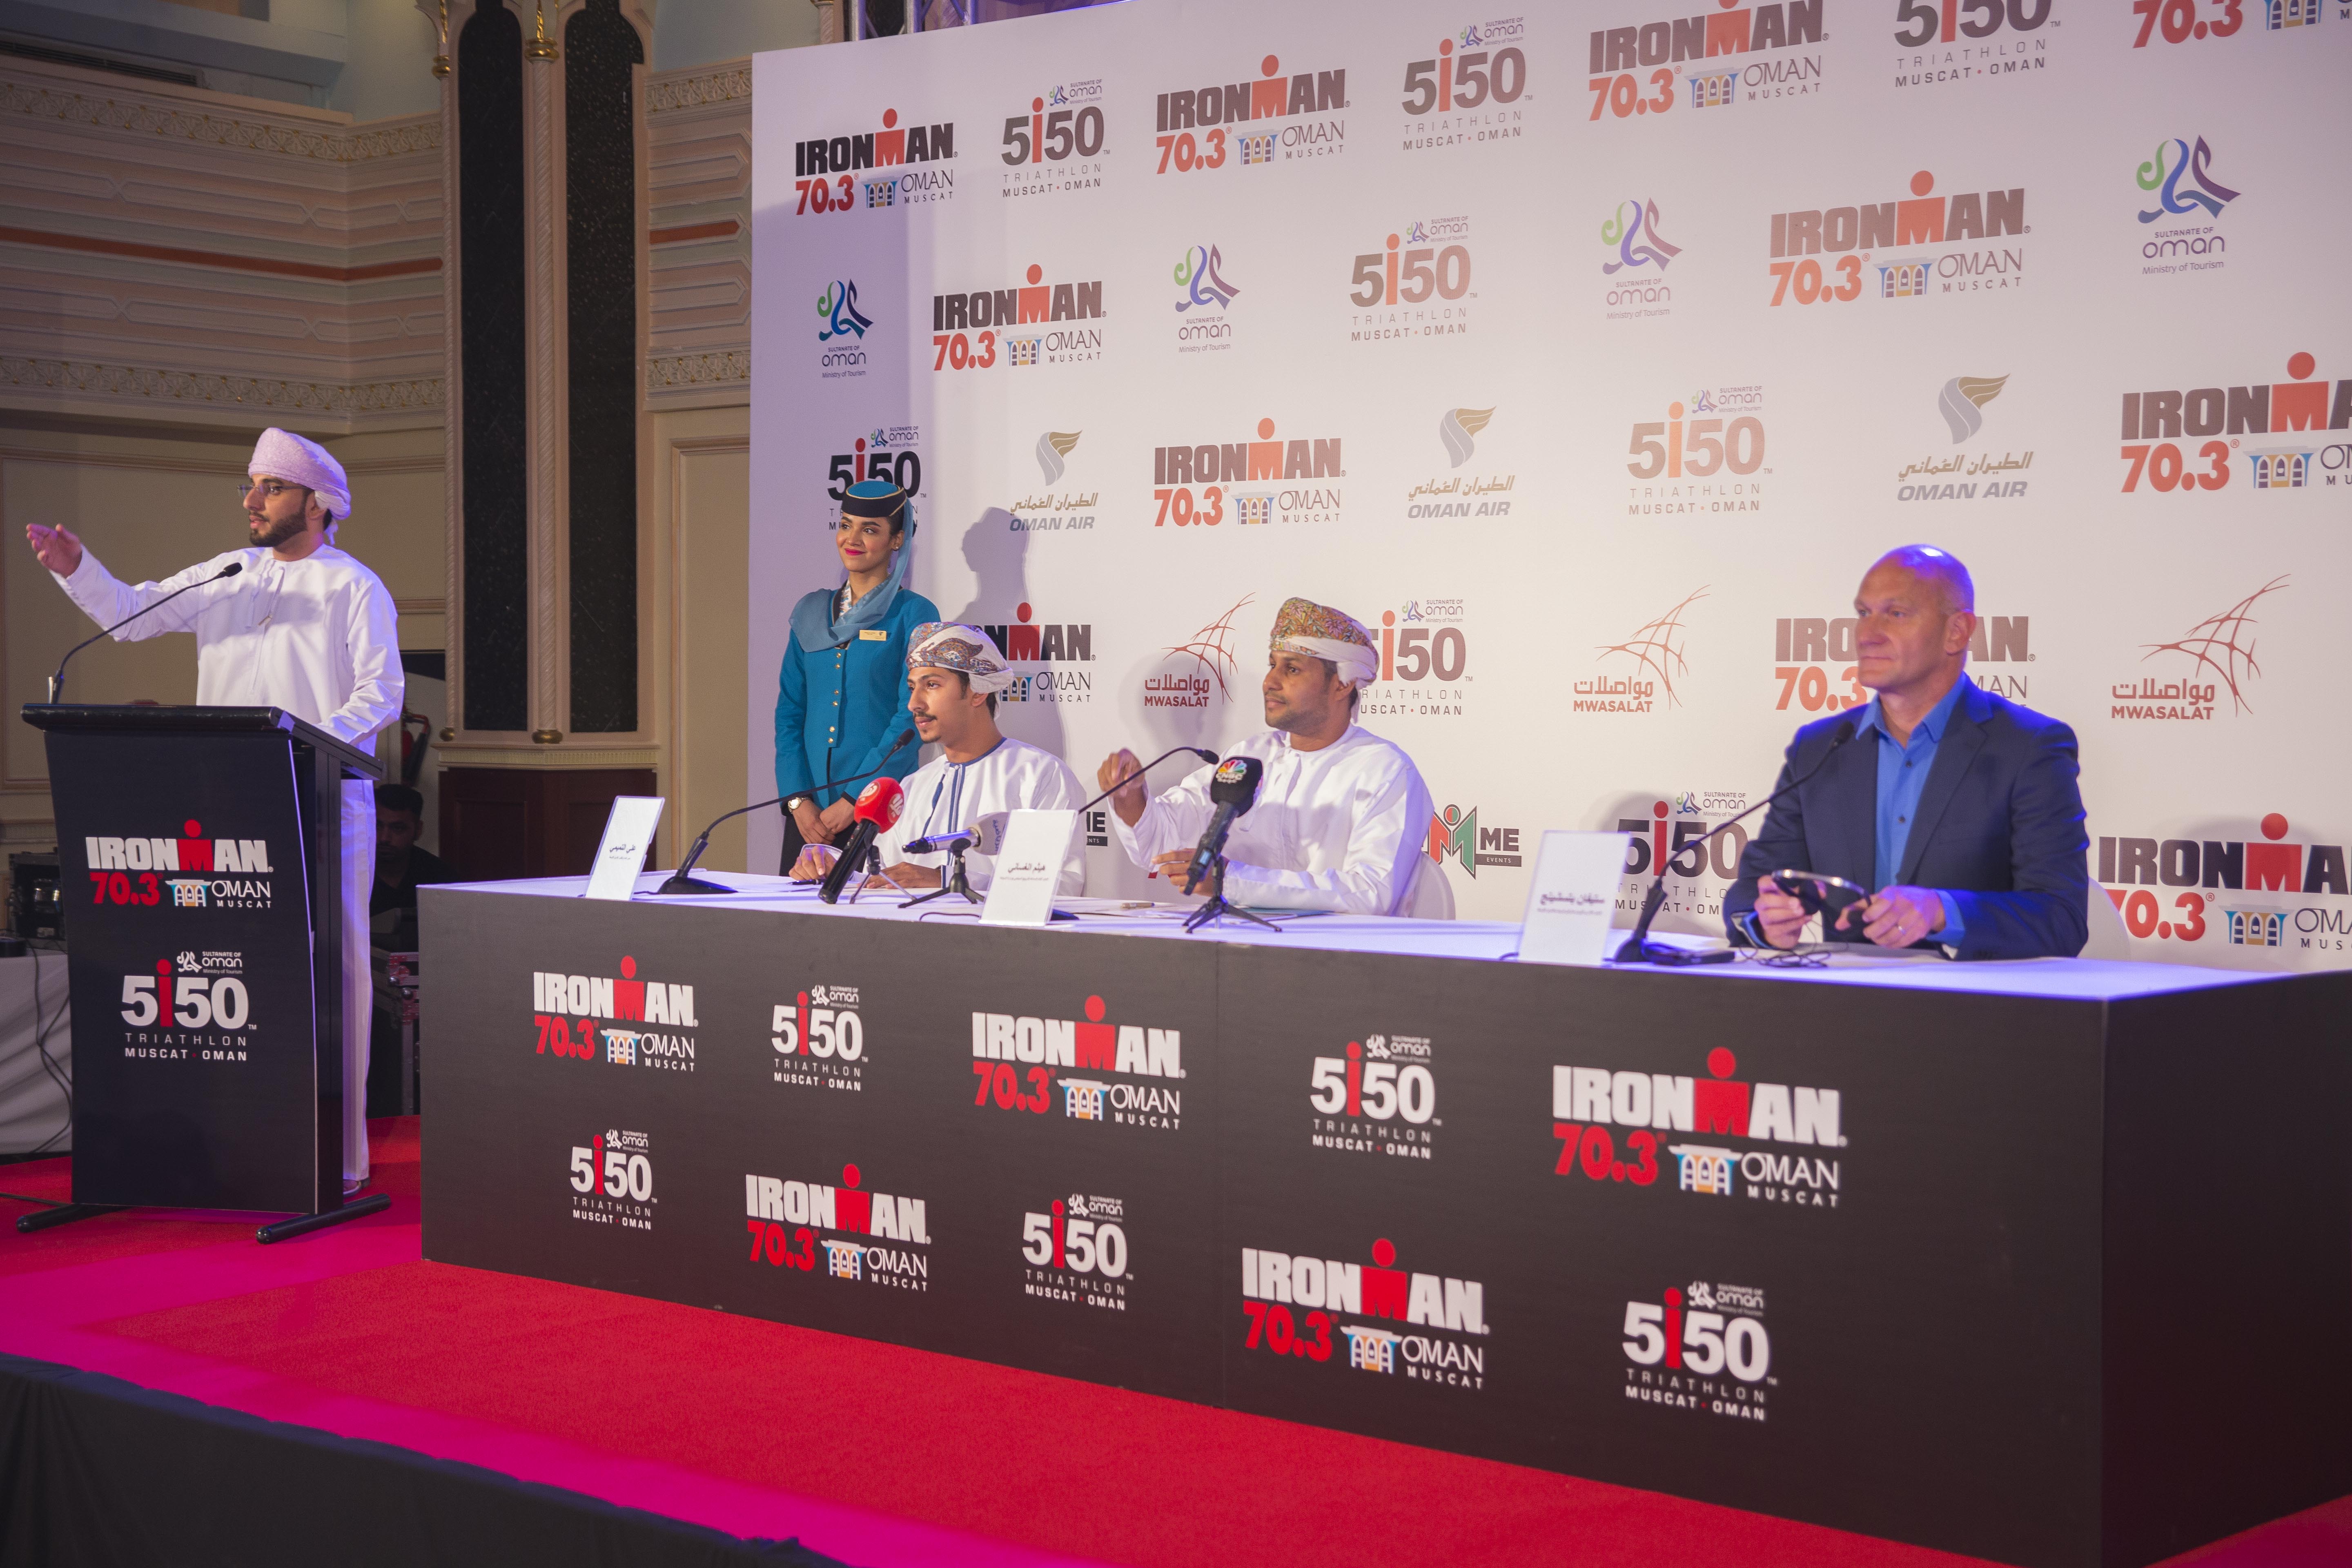 Here's when the Ironman Triathlon will be held in Oman